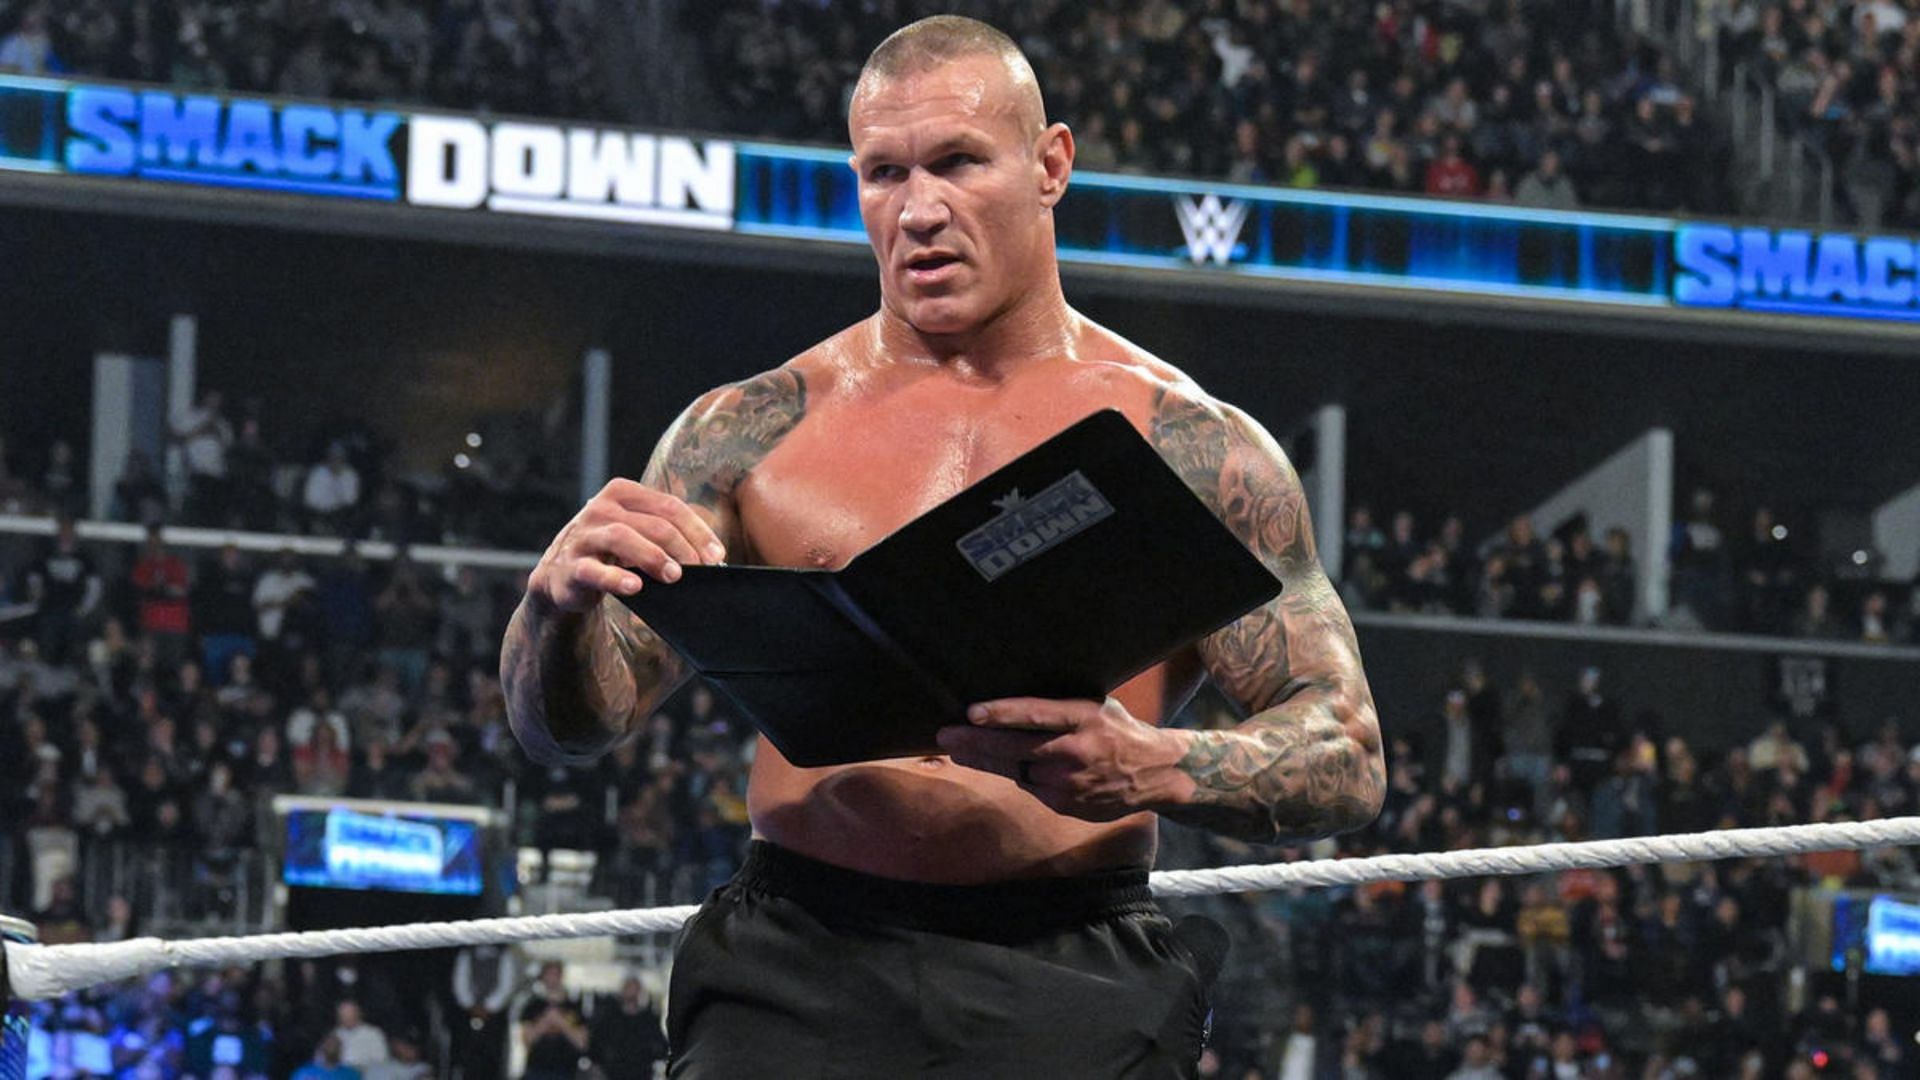 Randy Orton recently returned to in-ring action in WWE